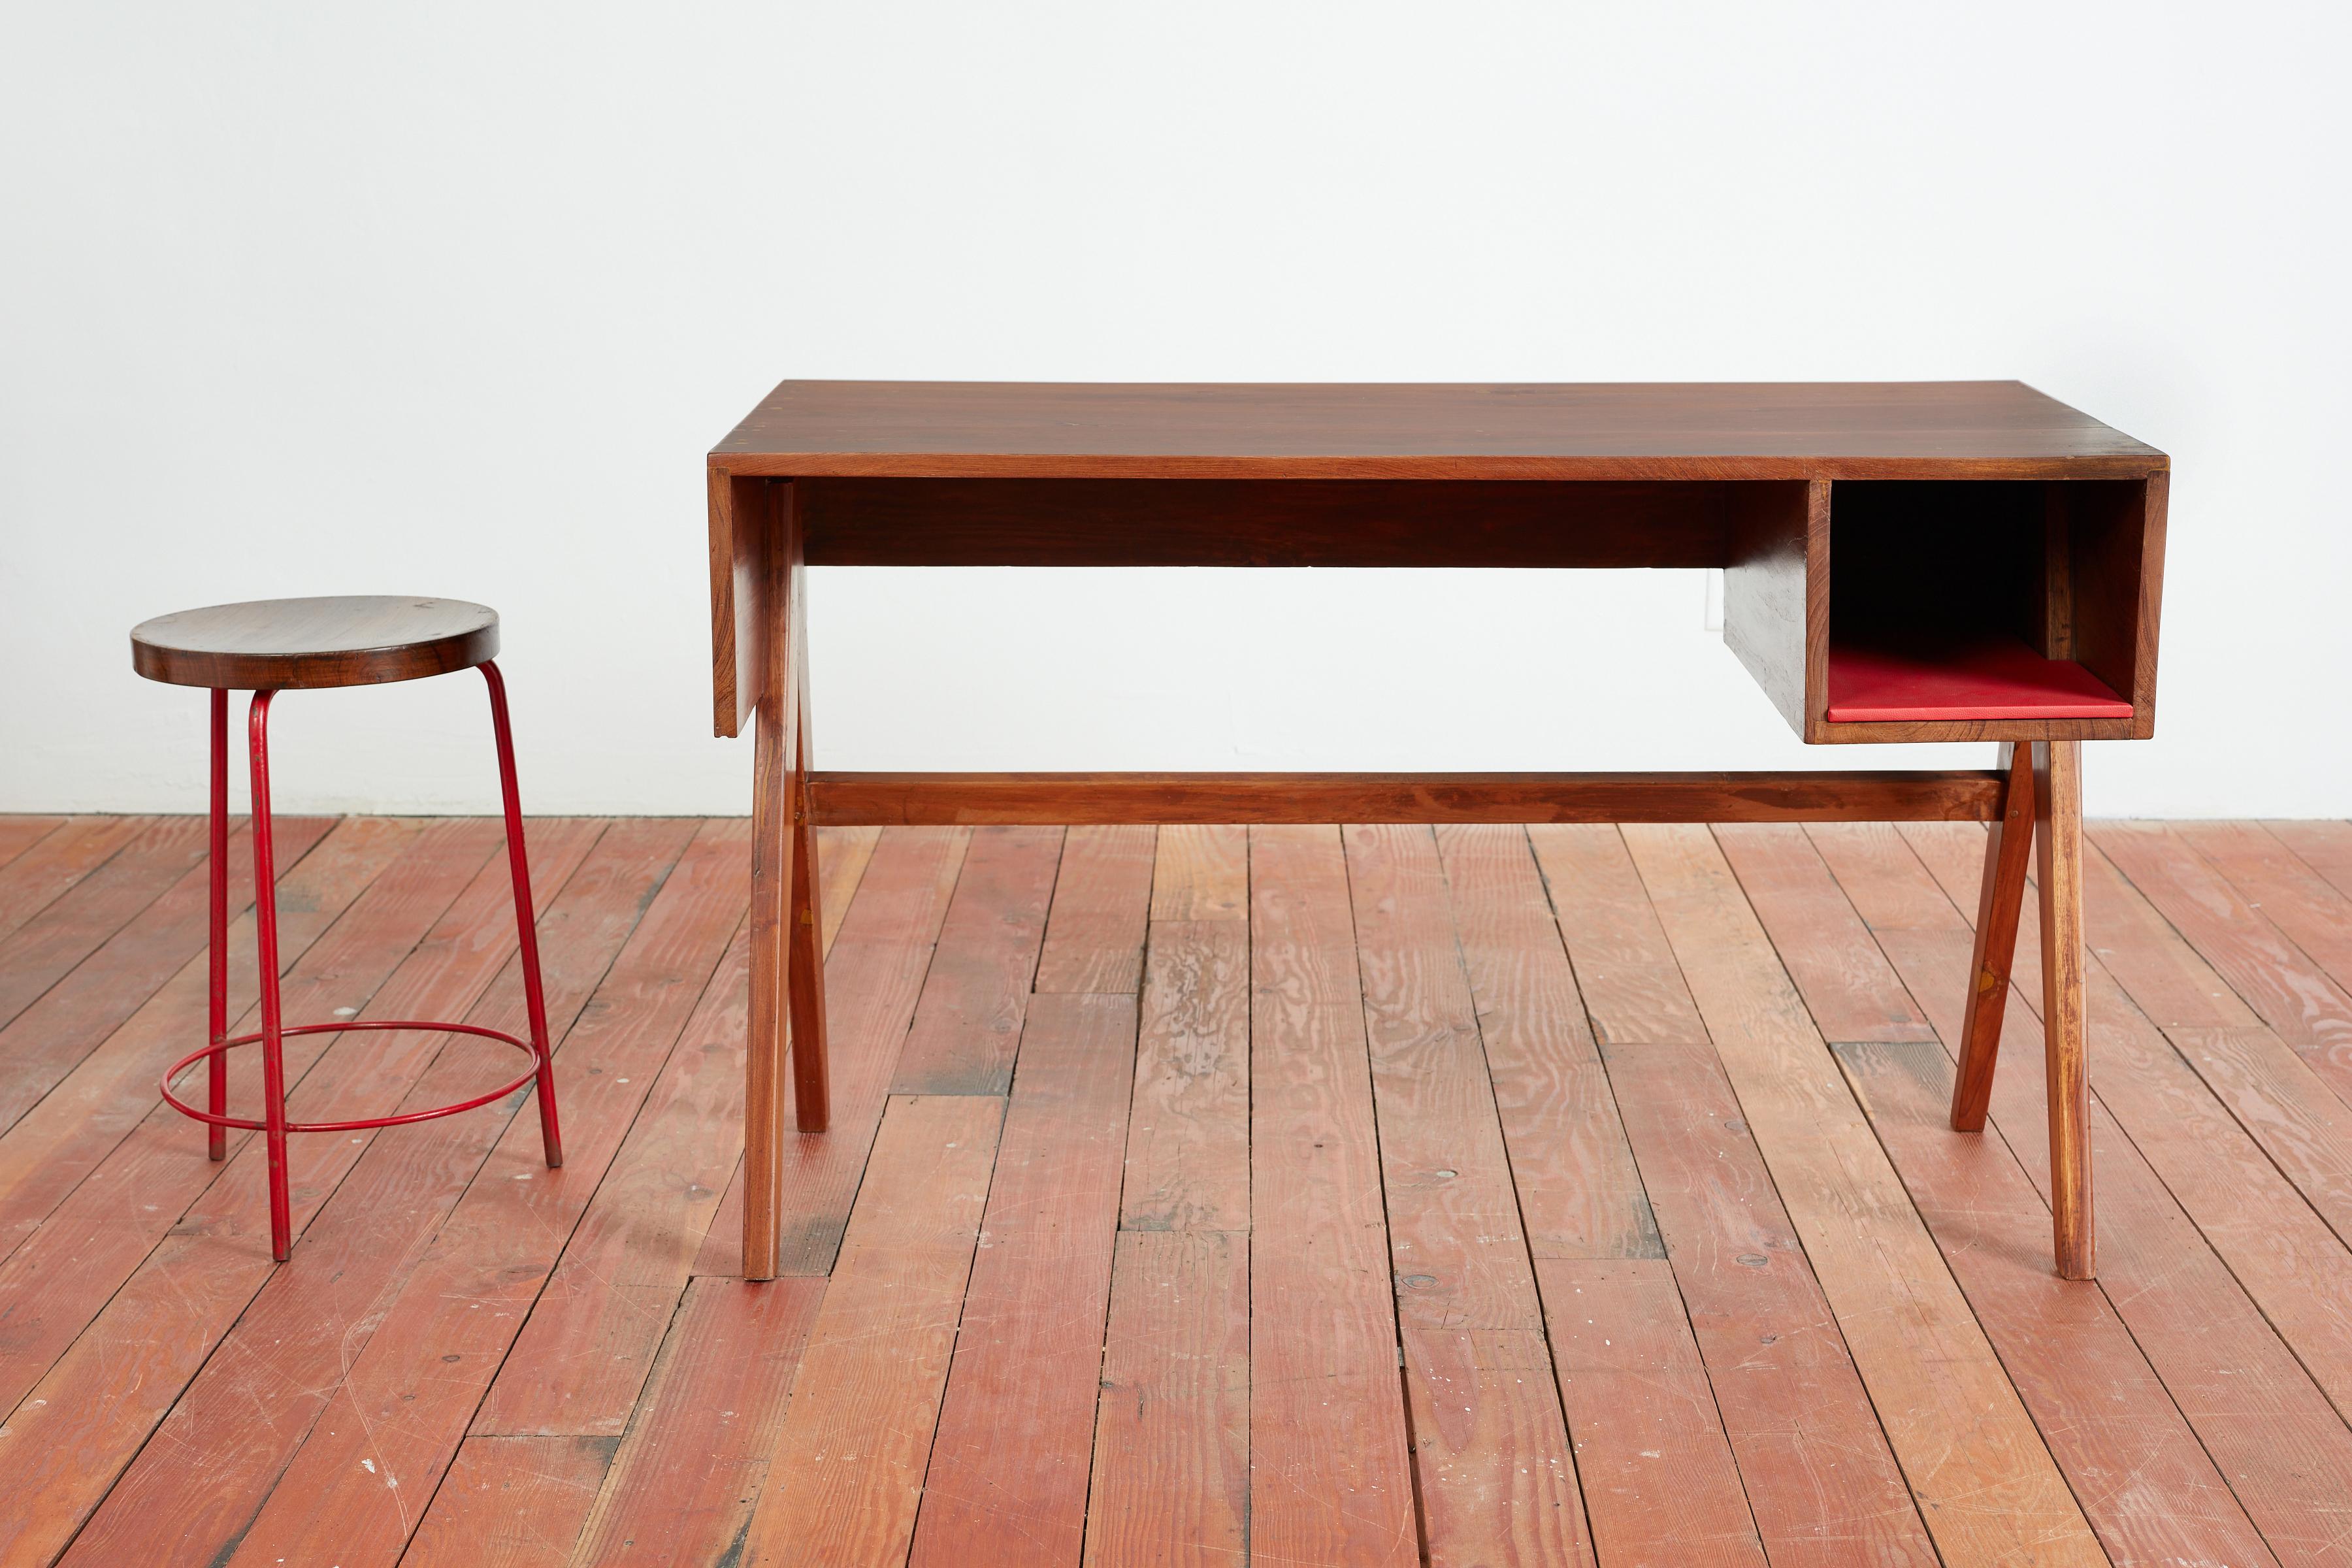 Pierre Jeanneret desk and stool from Chandigarh
France/India, c. 1960
Constructed of teak wood, stool has red enameled steel, and red vinyl inside storage cubby. 

desk: 29¼ h × 47¾ w × 23¾ d in (74 × 121 × 60 cm)
stool: 21½ h × 14¾ dia in (55 × 37